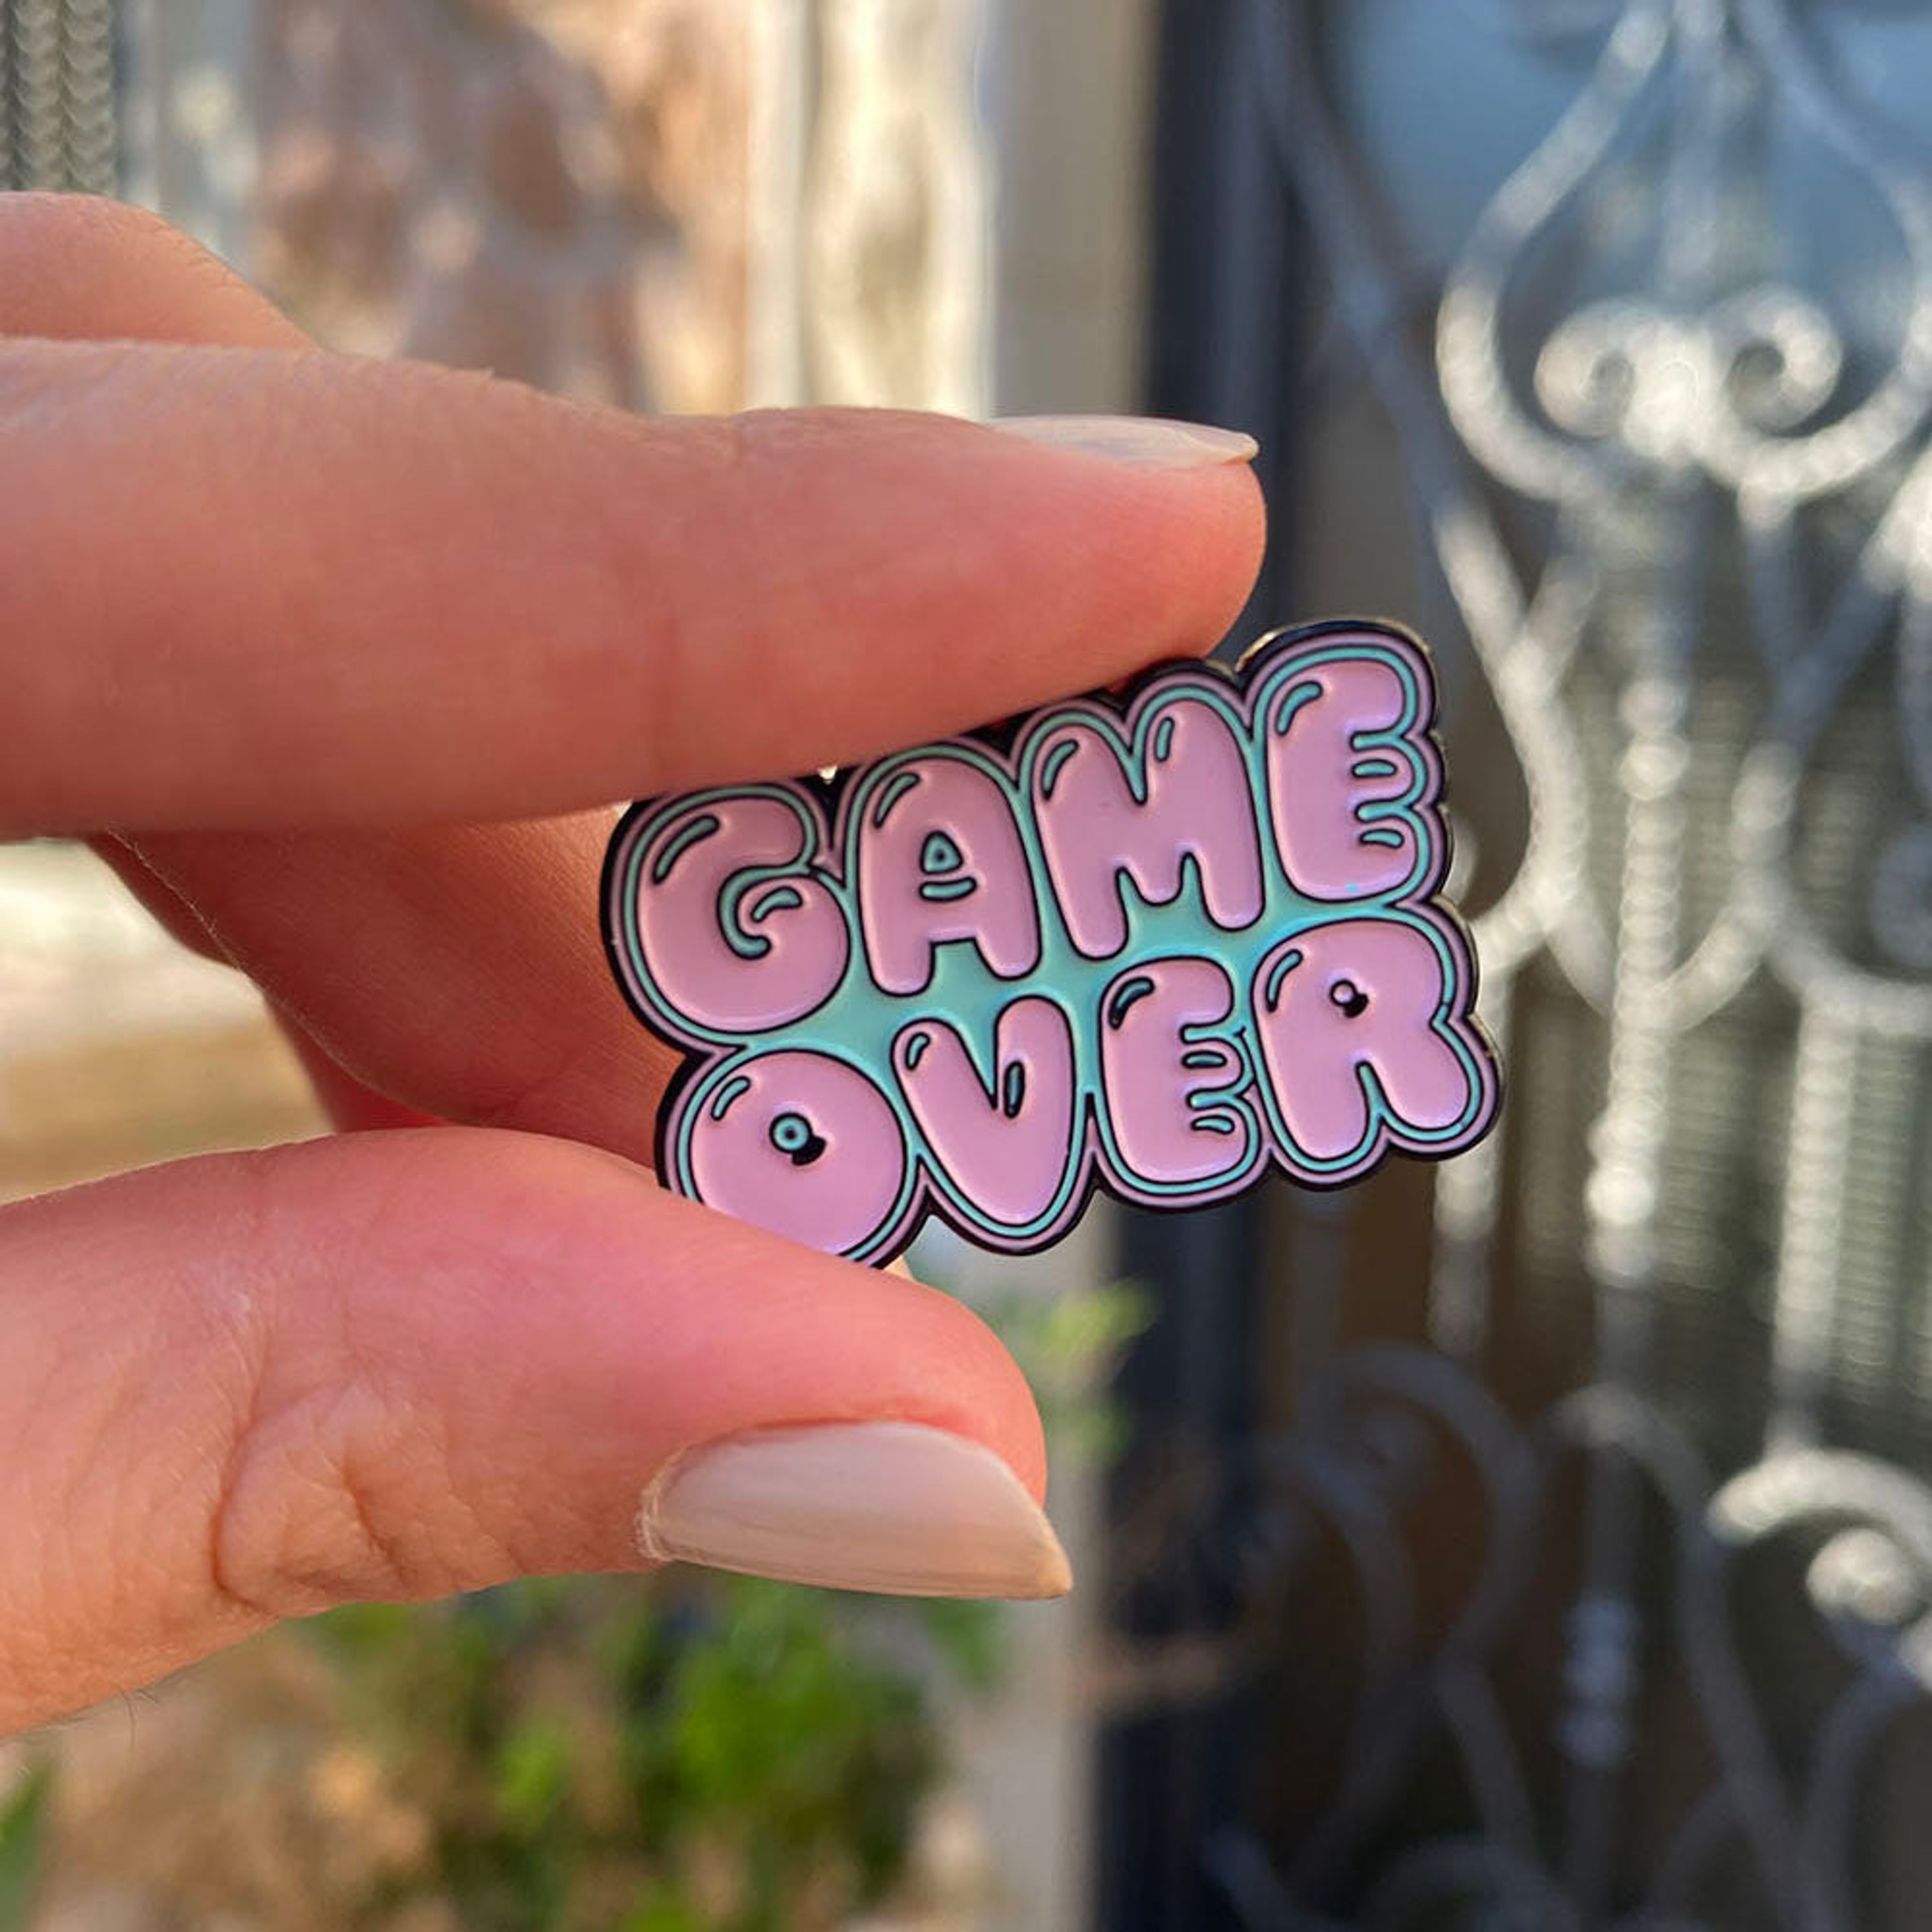 Game Over Pin